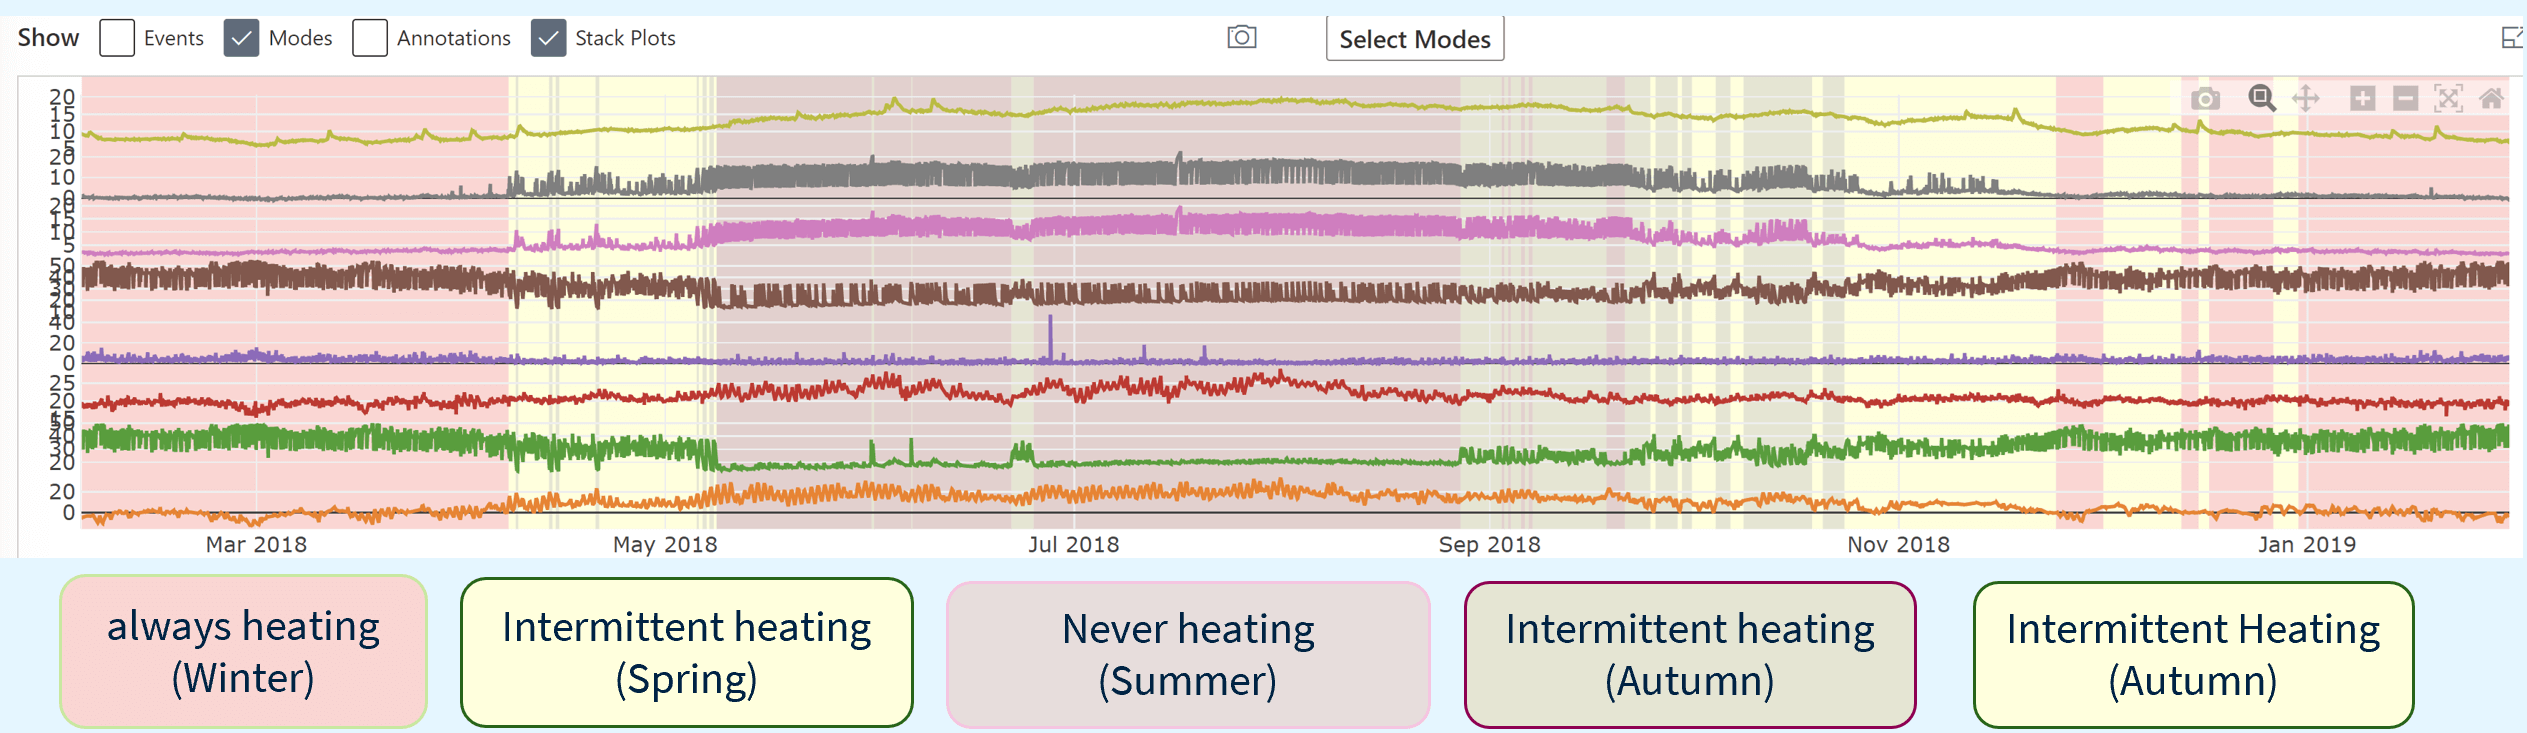 Graphic visualization of data showing the operational modes of a heatpump